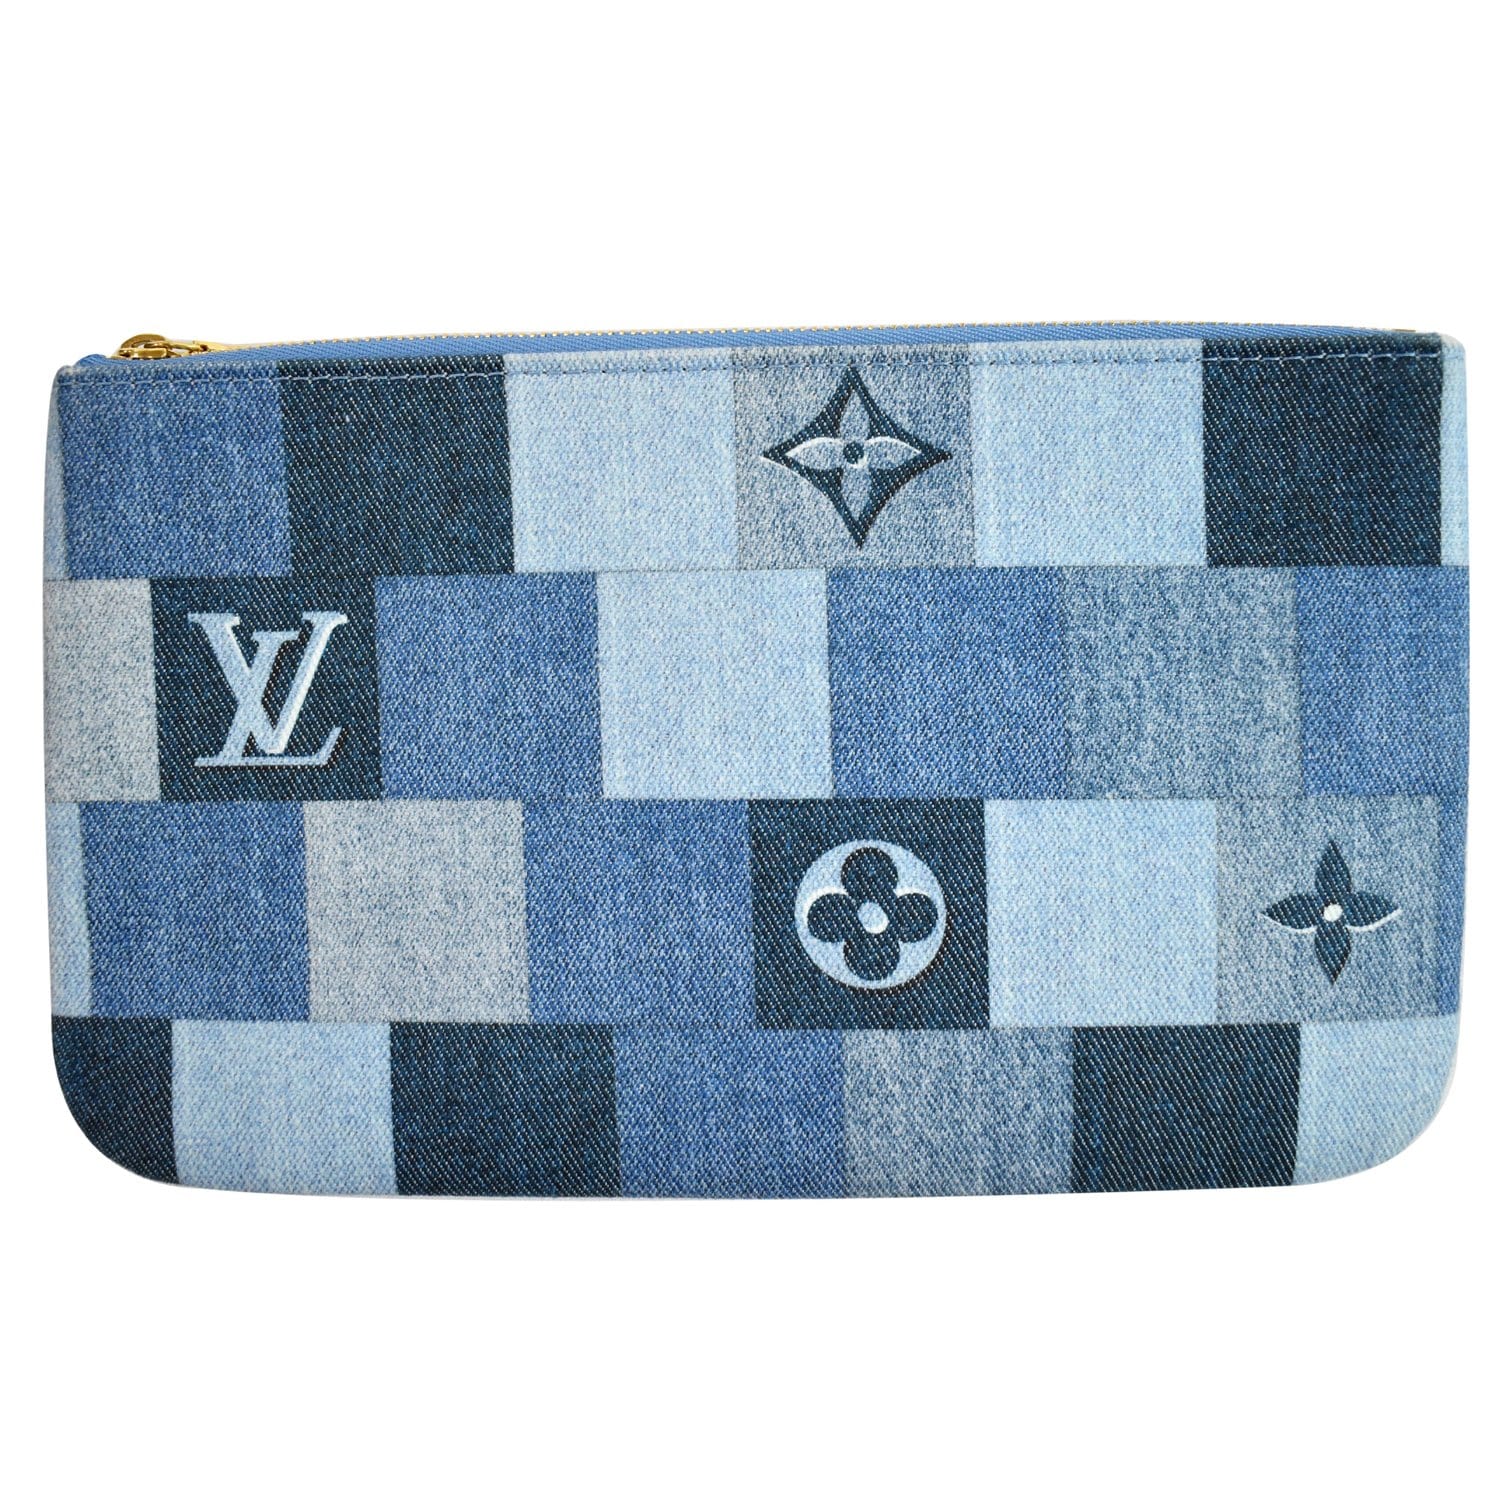 Memes Treasures Sales and Authentication Service - Just in! New arrival. Louis  Vuitton Bleu Denim Epi Neverfull MM w/ Wristlet Pouch   neverfull-mm-w-wristlet-pouch/